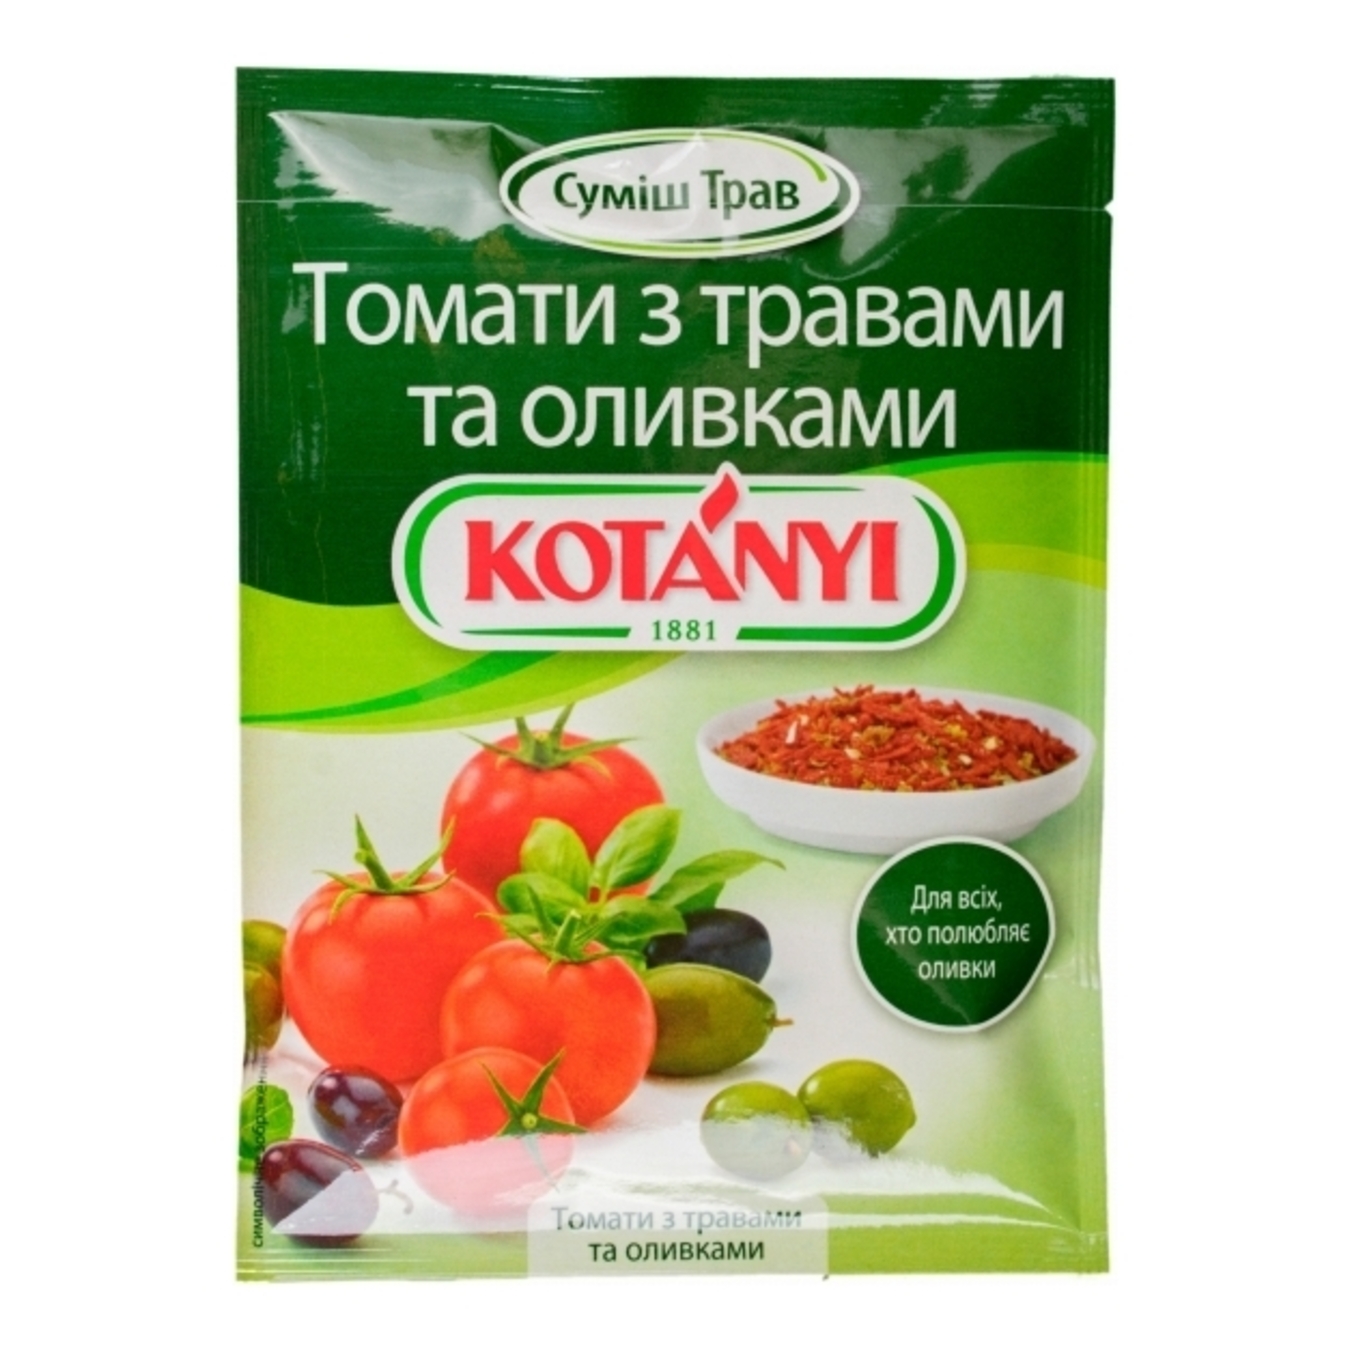 Kotanyi tomatoes with herbs and olives spices 20g